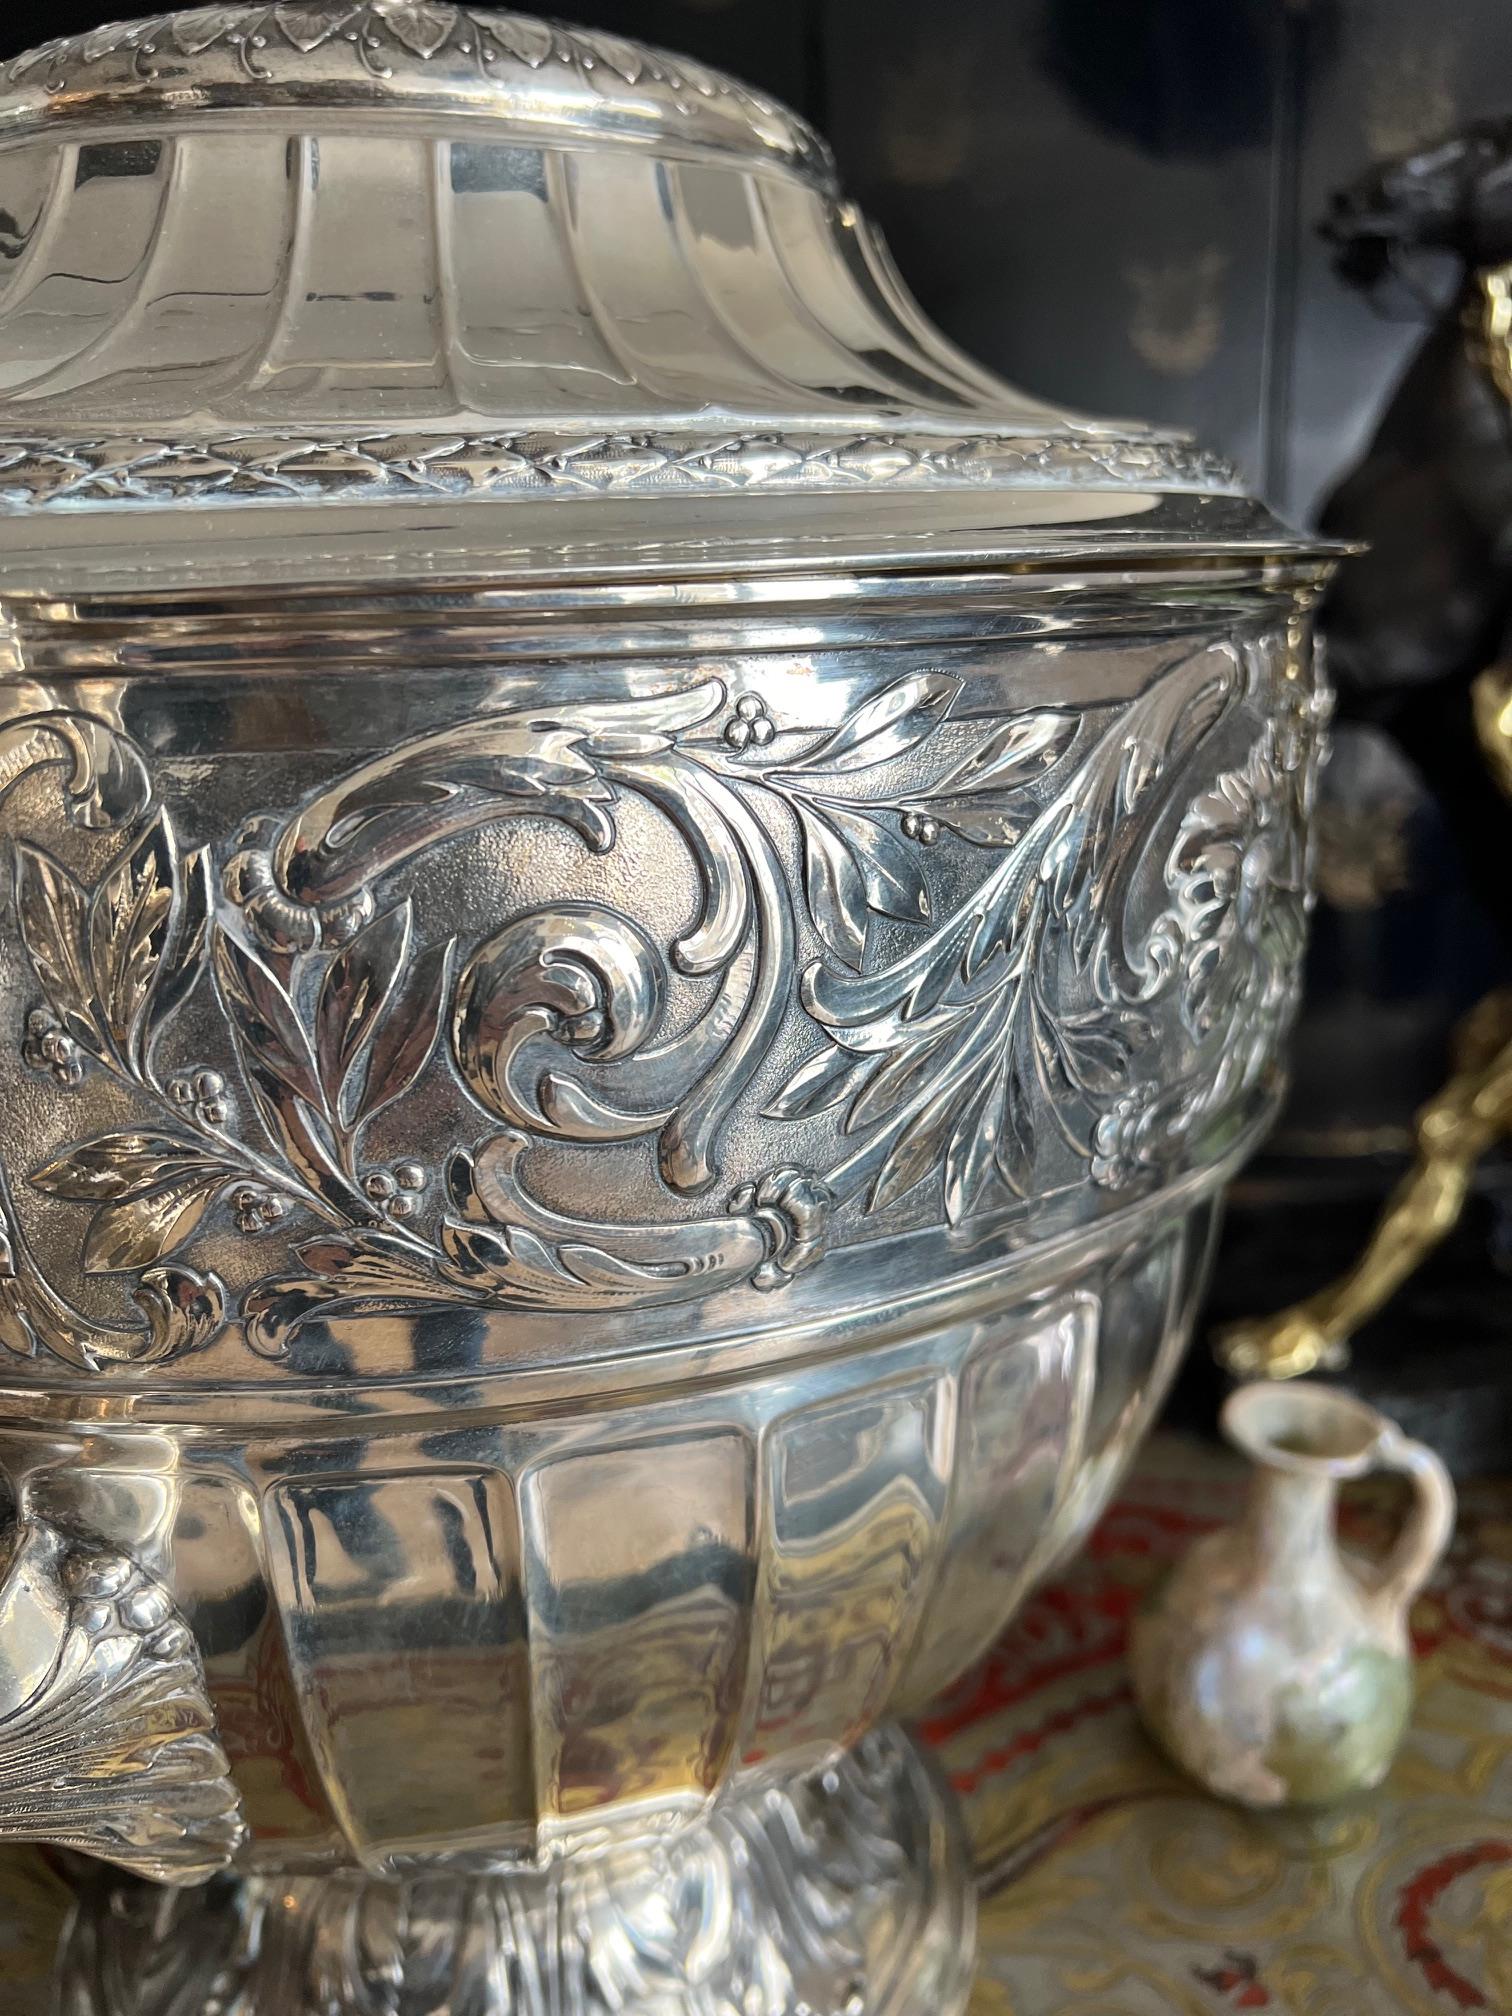 A MASSIVE SILVER CUP AND COVER, GERMAN, C. 1910 - Image 6 of 9